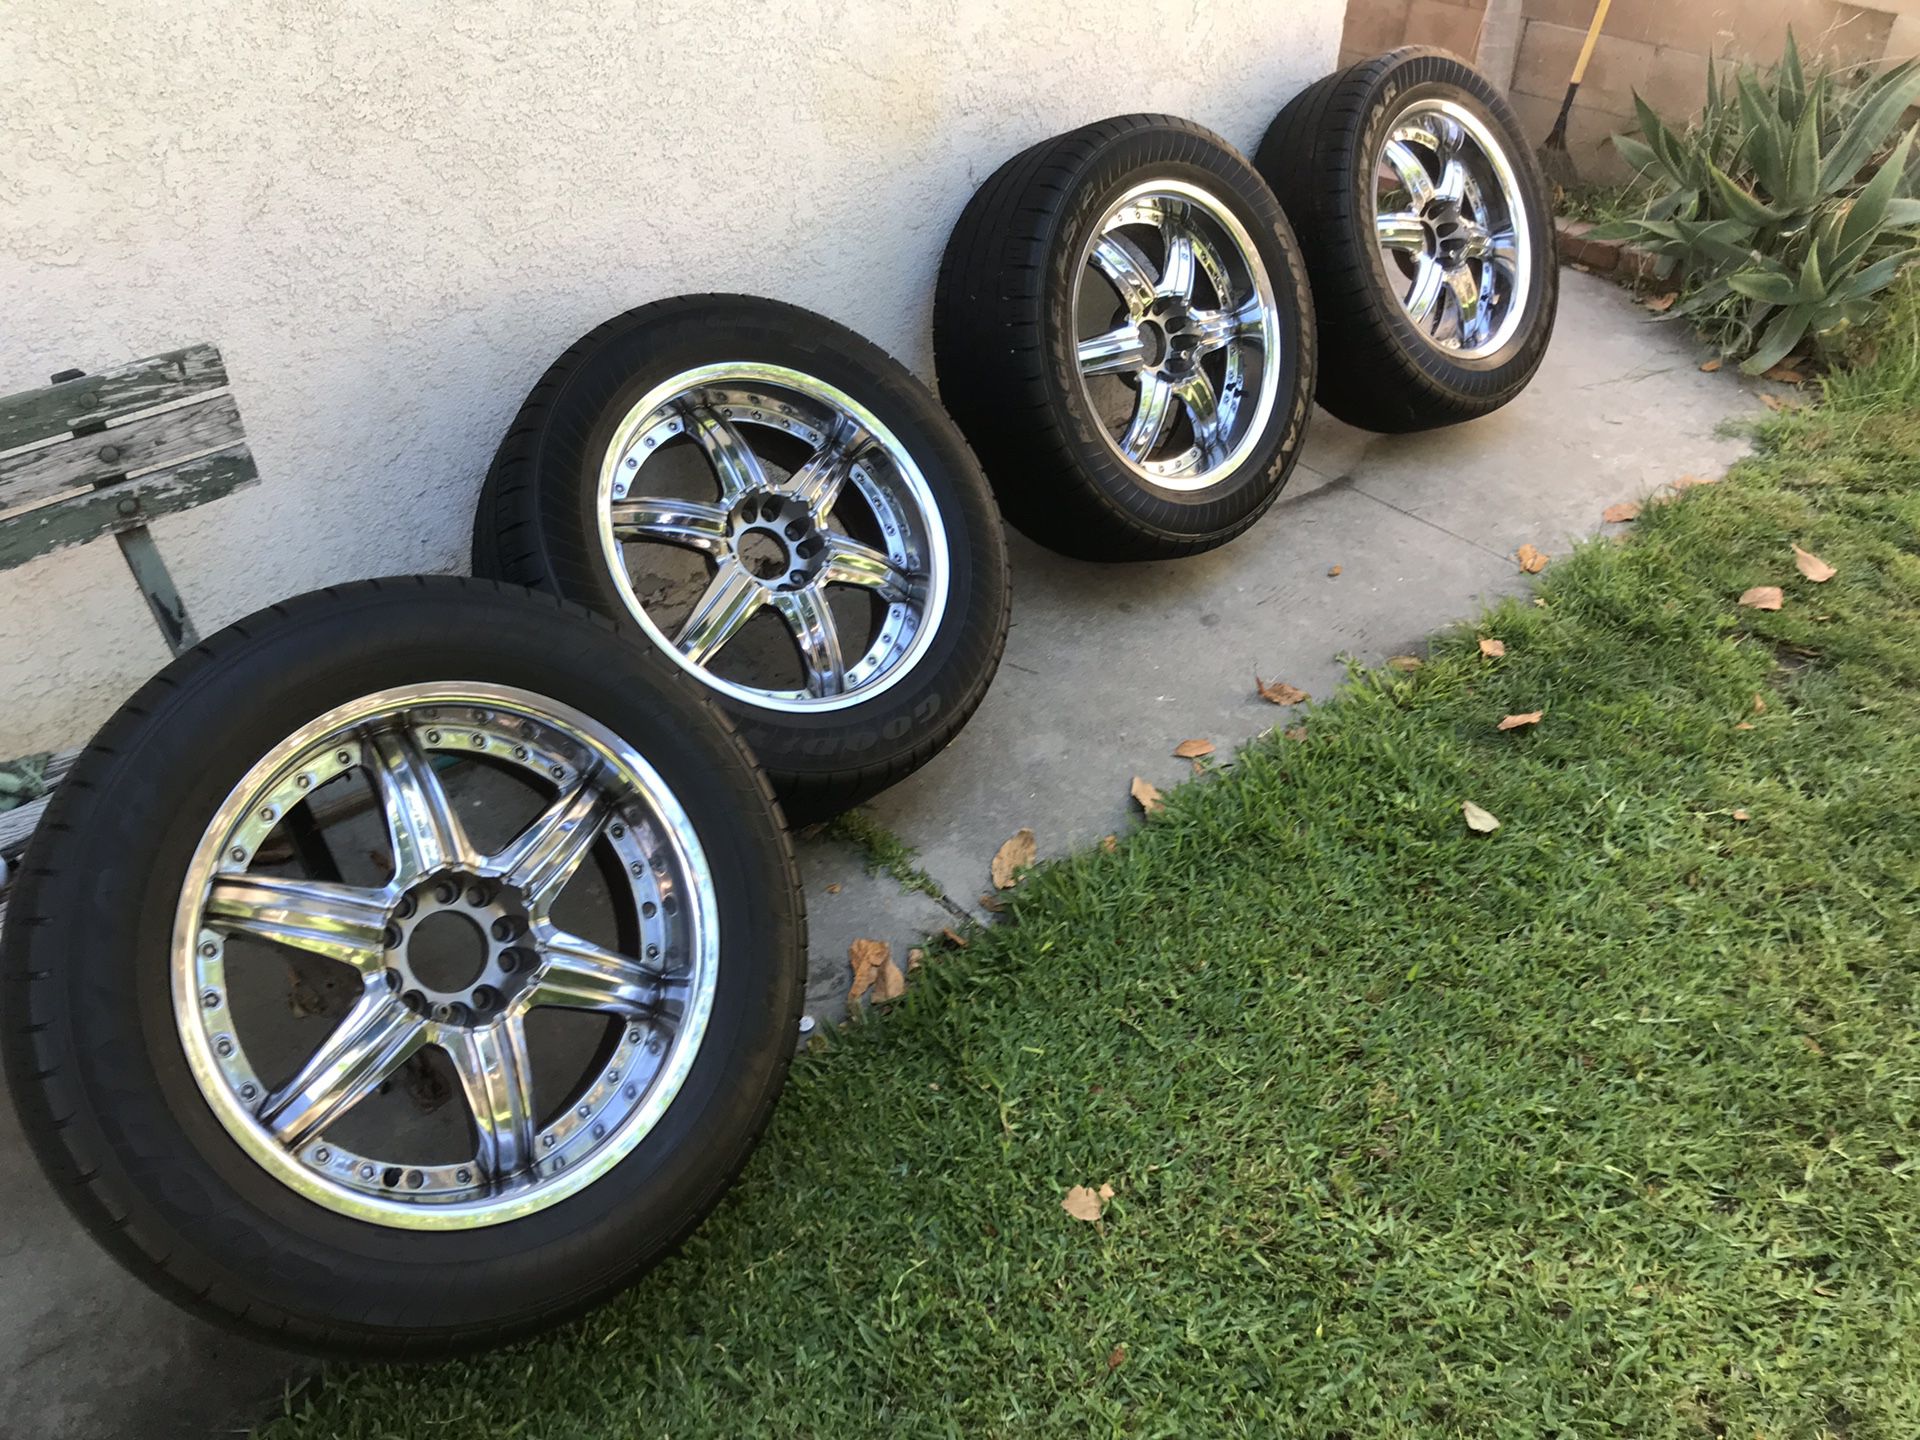 2000 Ford F-150 Tires and Rims size 22 brand Goodyear ( Eagle)